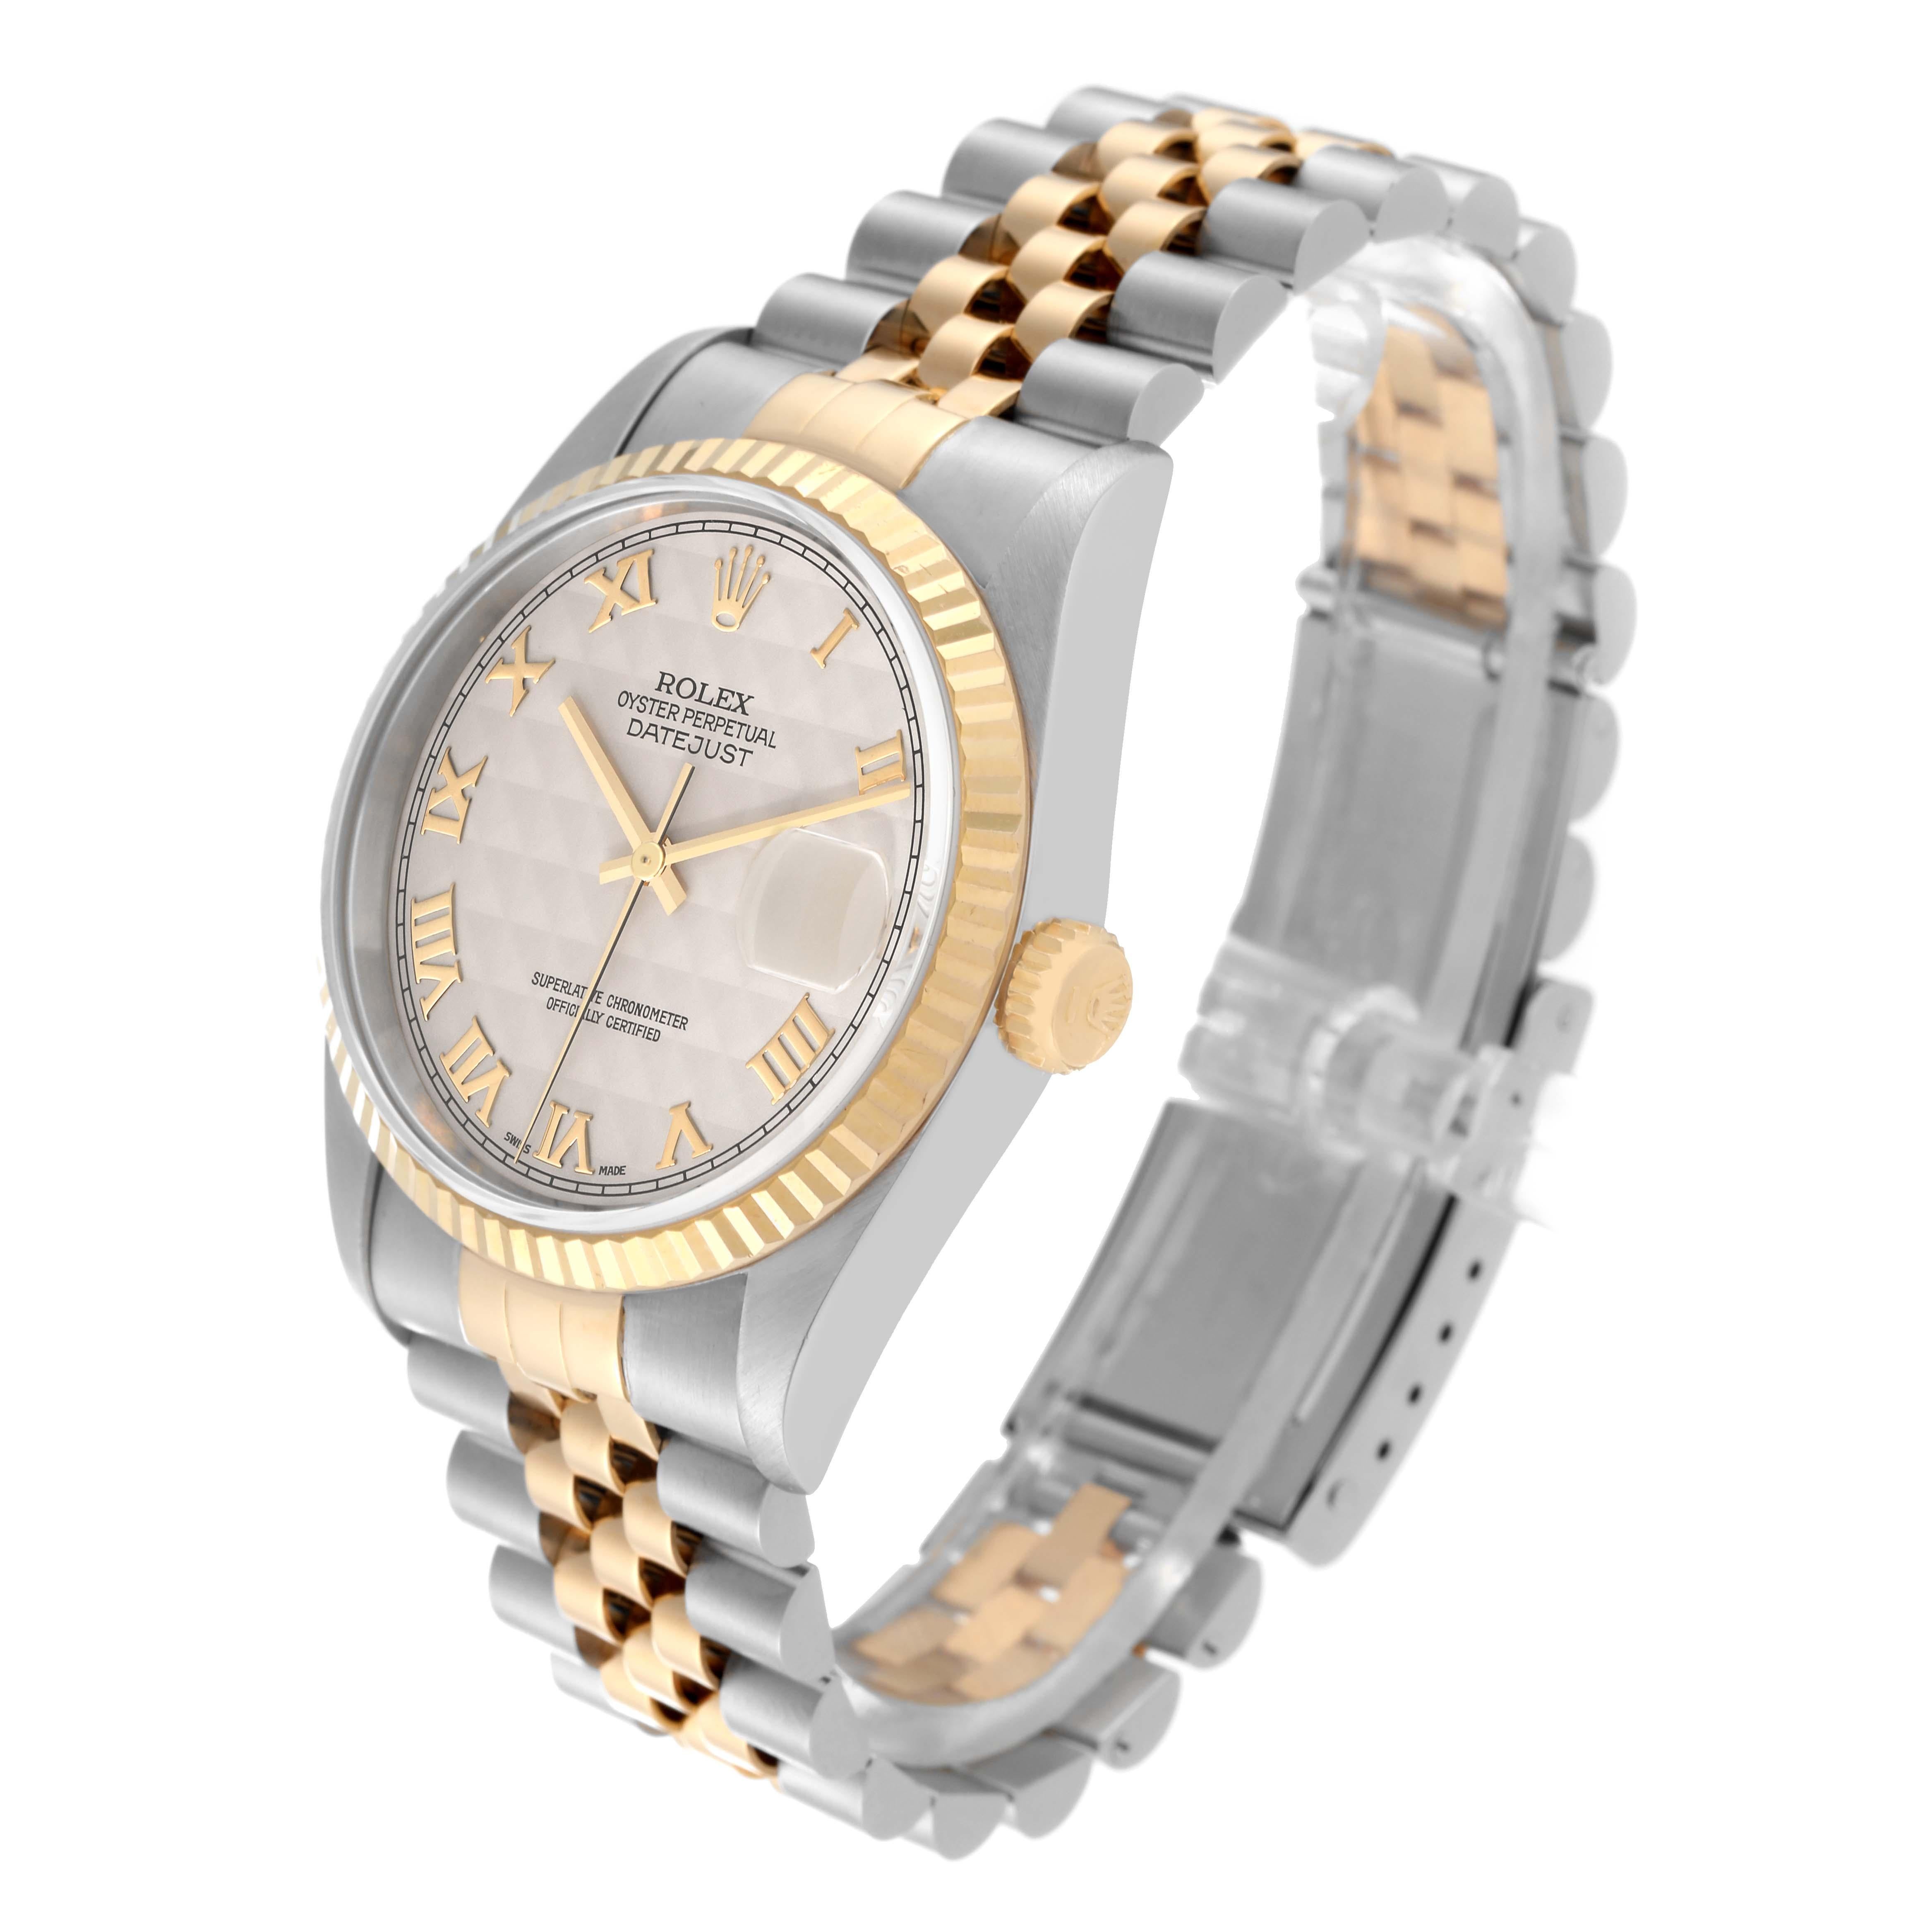 Rolex Datejust Steel Yellow Gold Ivory Pyramid Dial Mens Watch 16233 Box Papers en vente 7